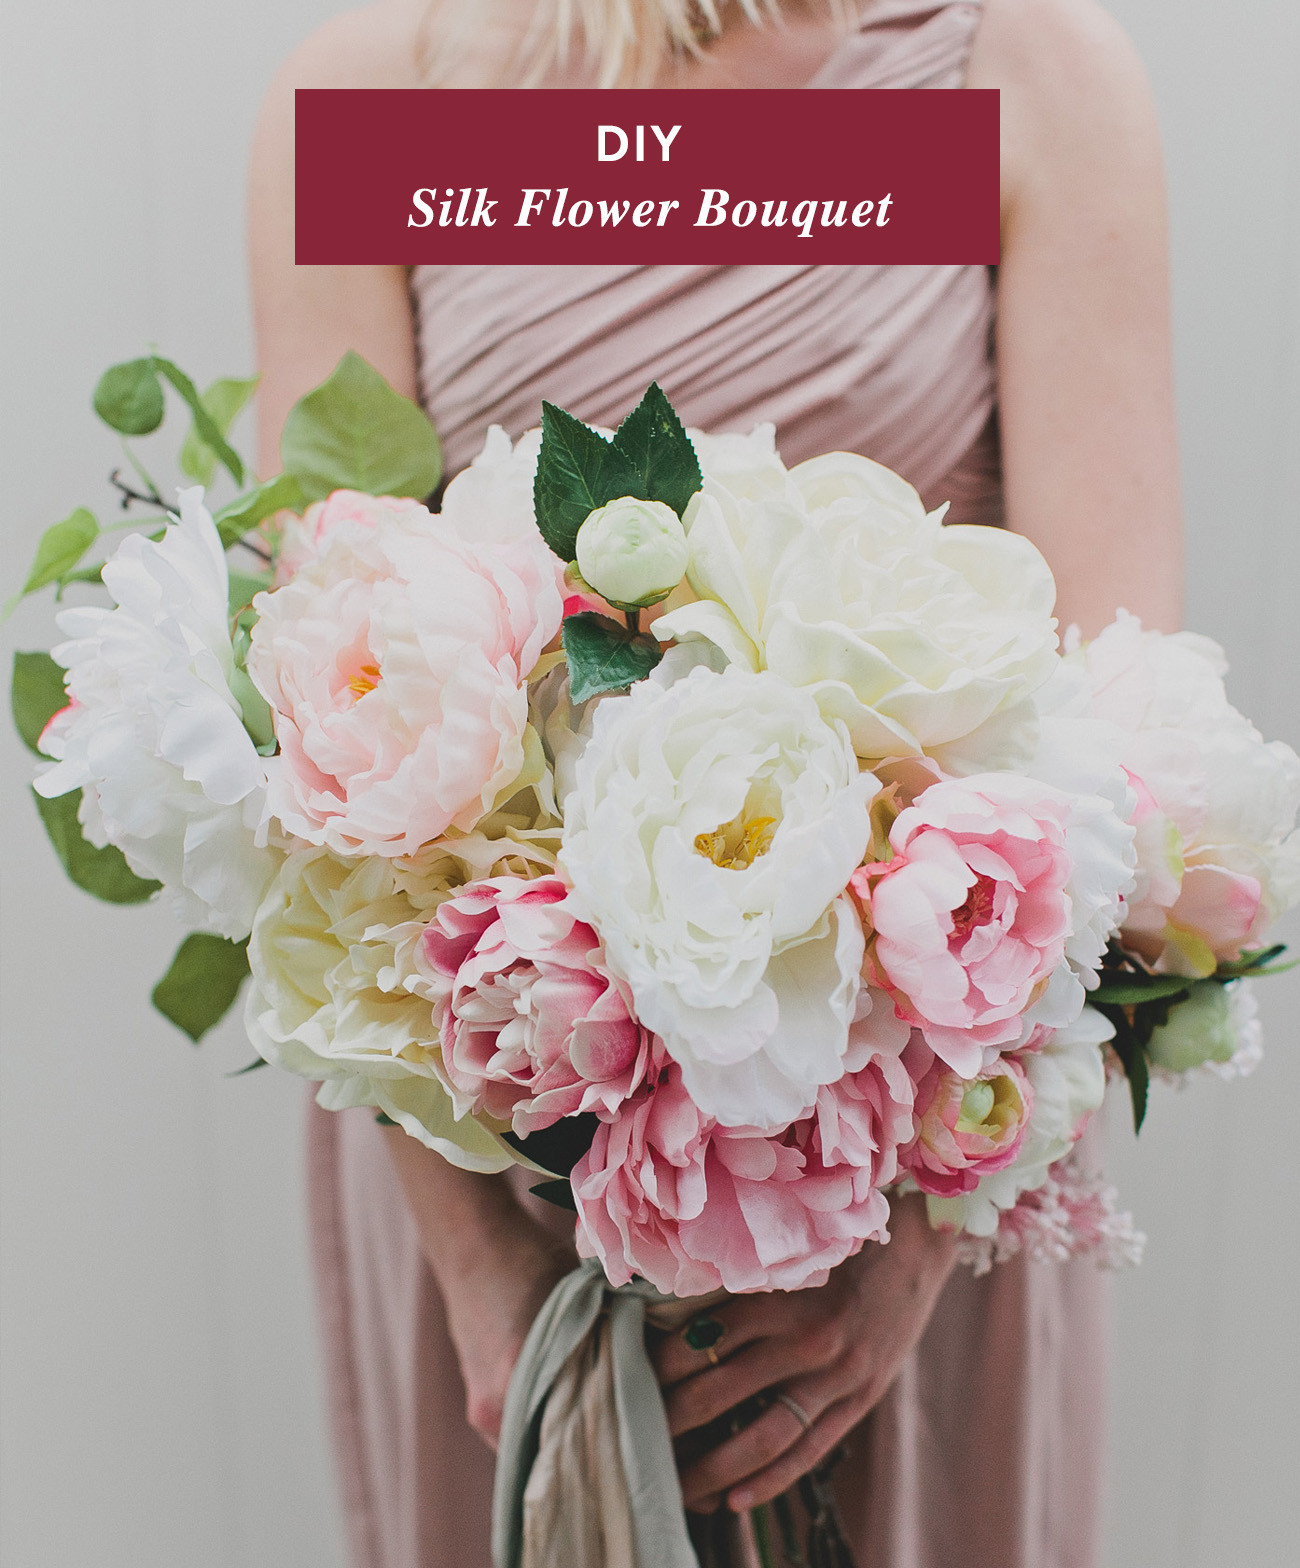 How To Diy Wedding Flowers
 DIY Silk Flower Bouquet with Afloral Green Wedding Shoes